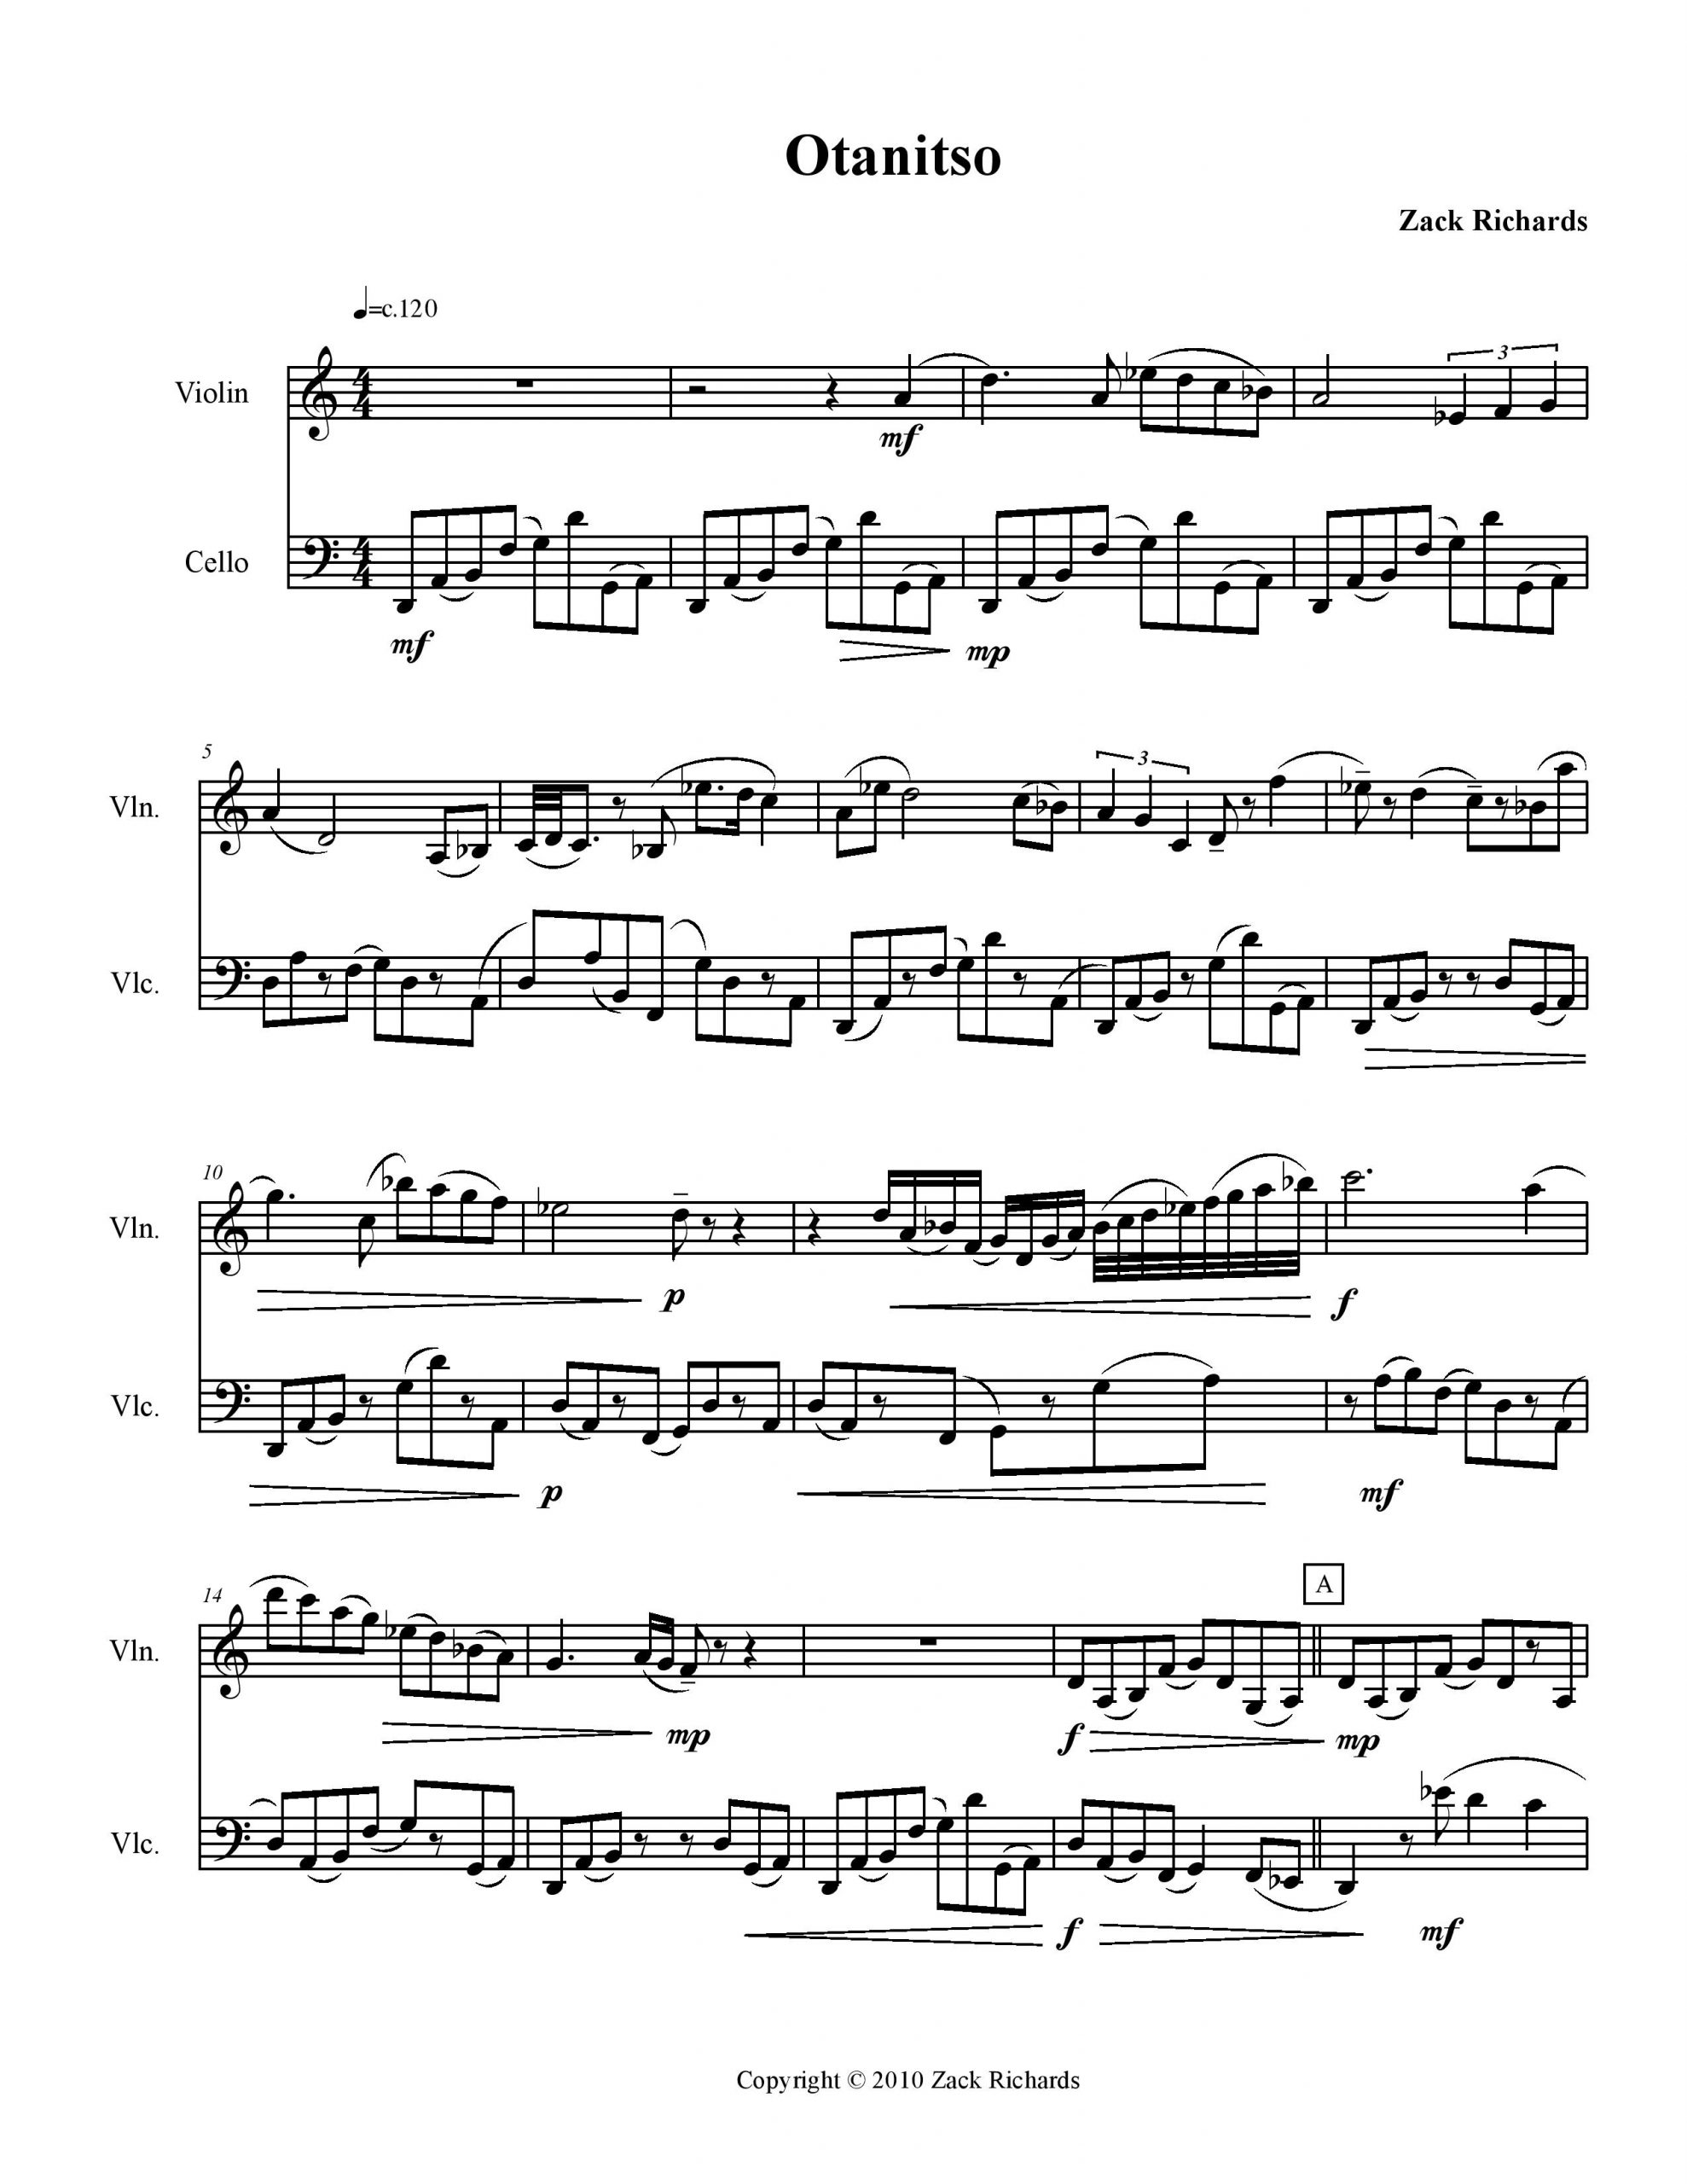 Otanitso for Violin and Cello duet